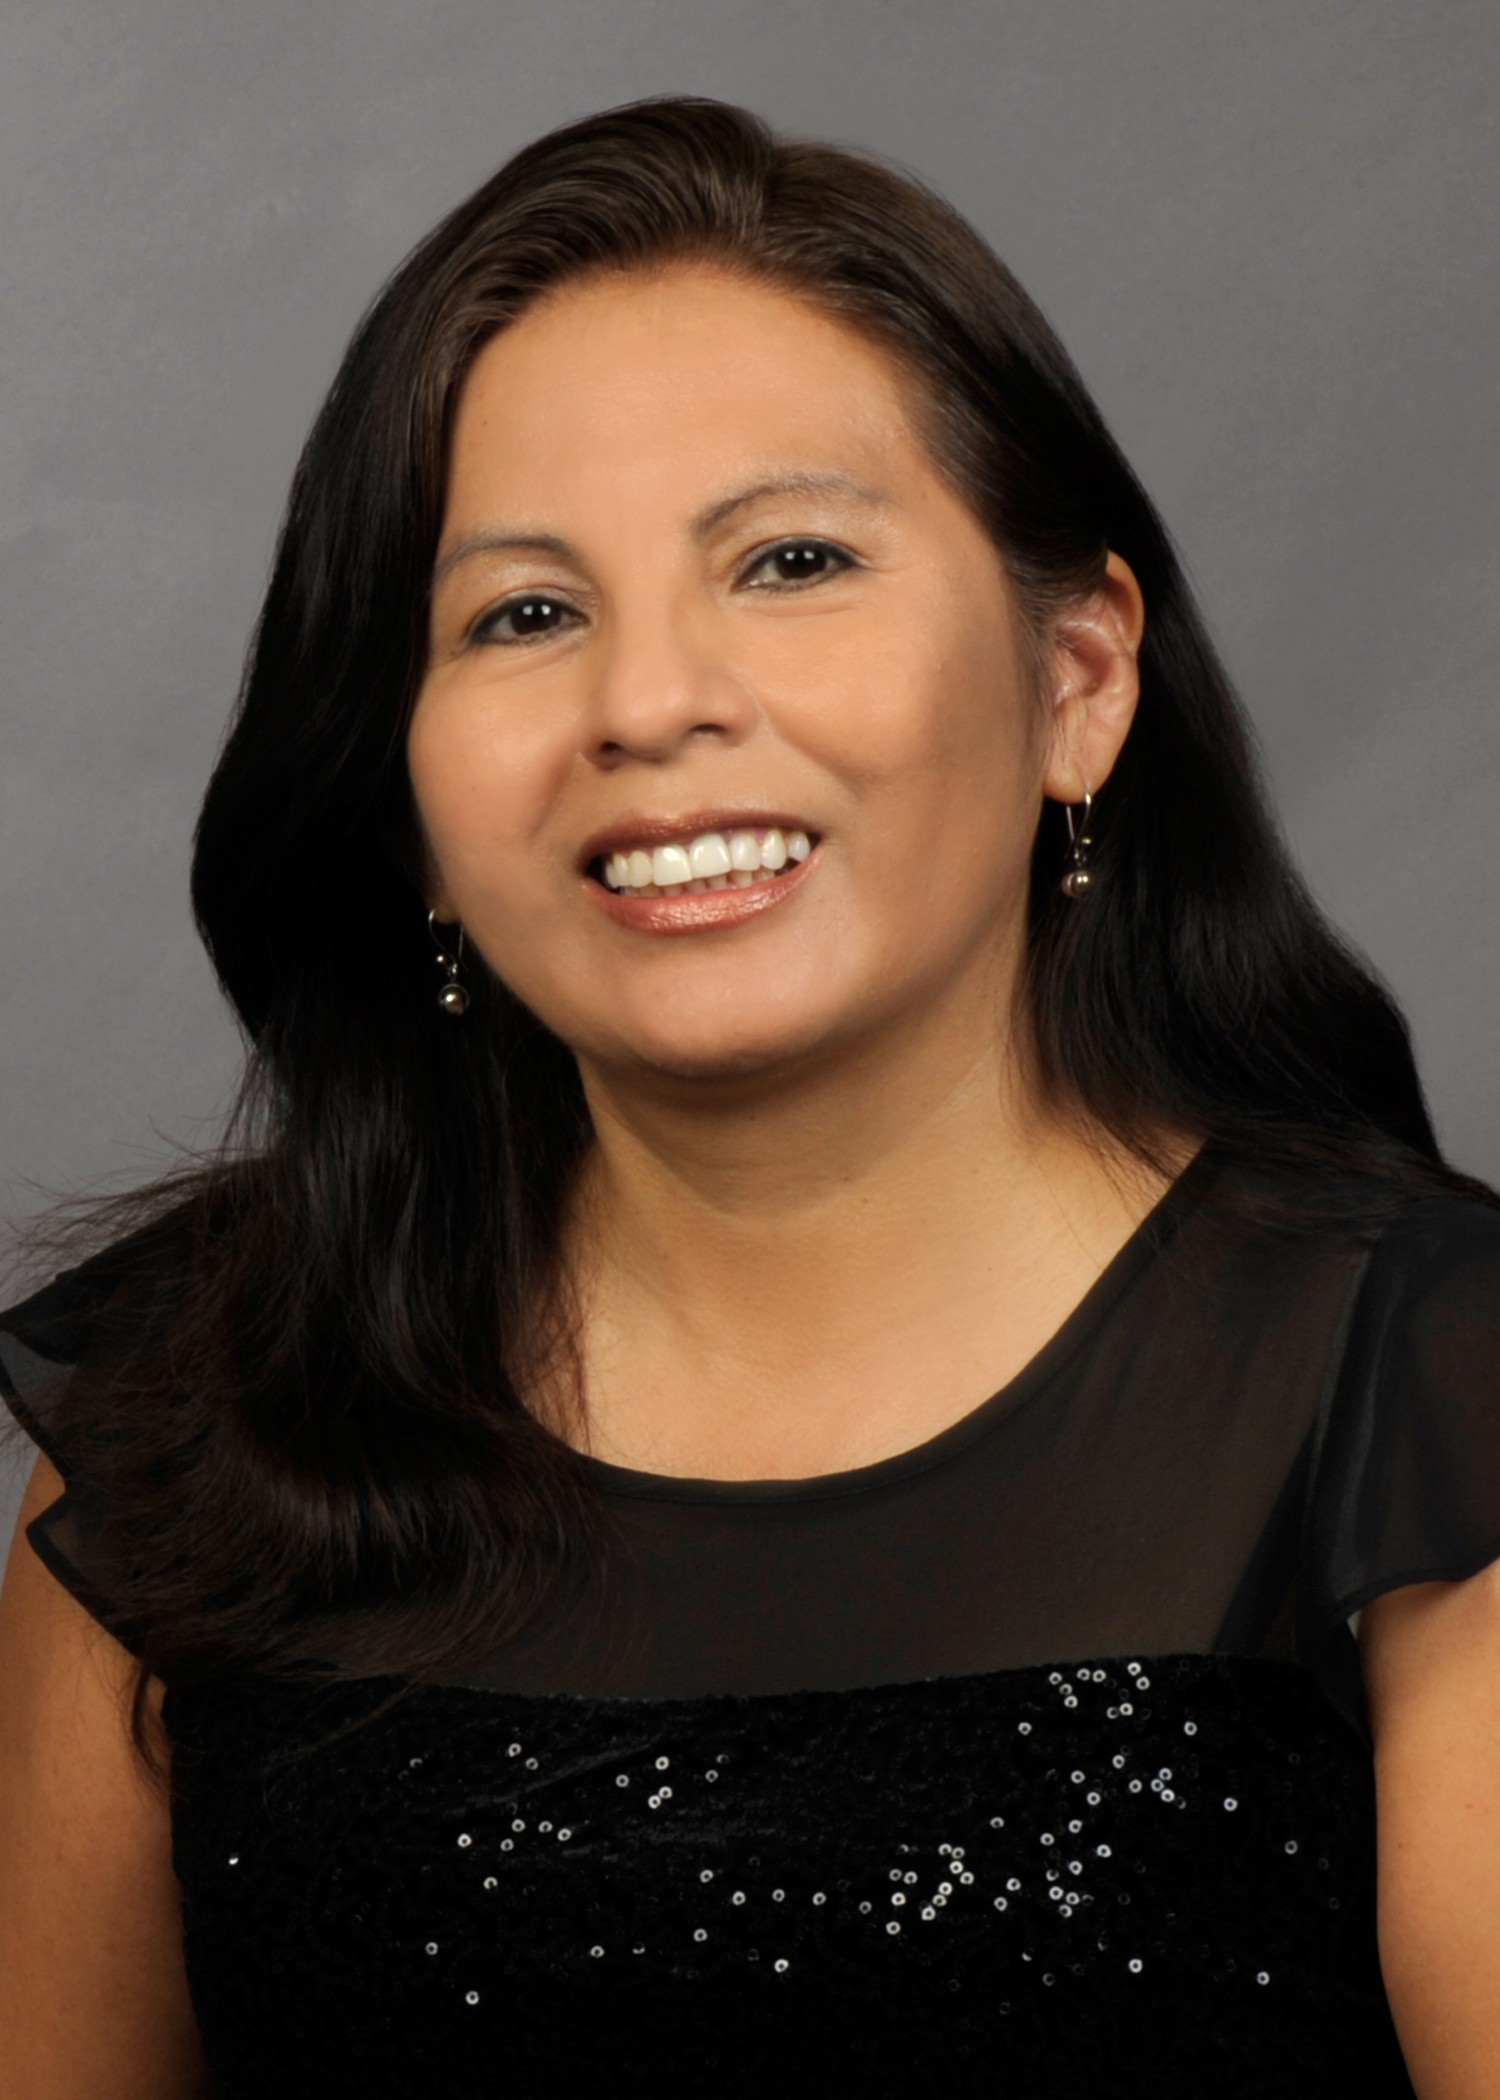 Portrait of a smiling woman with long dark hair, wearing a black sequined top and earrings.